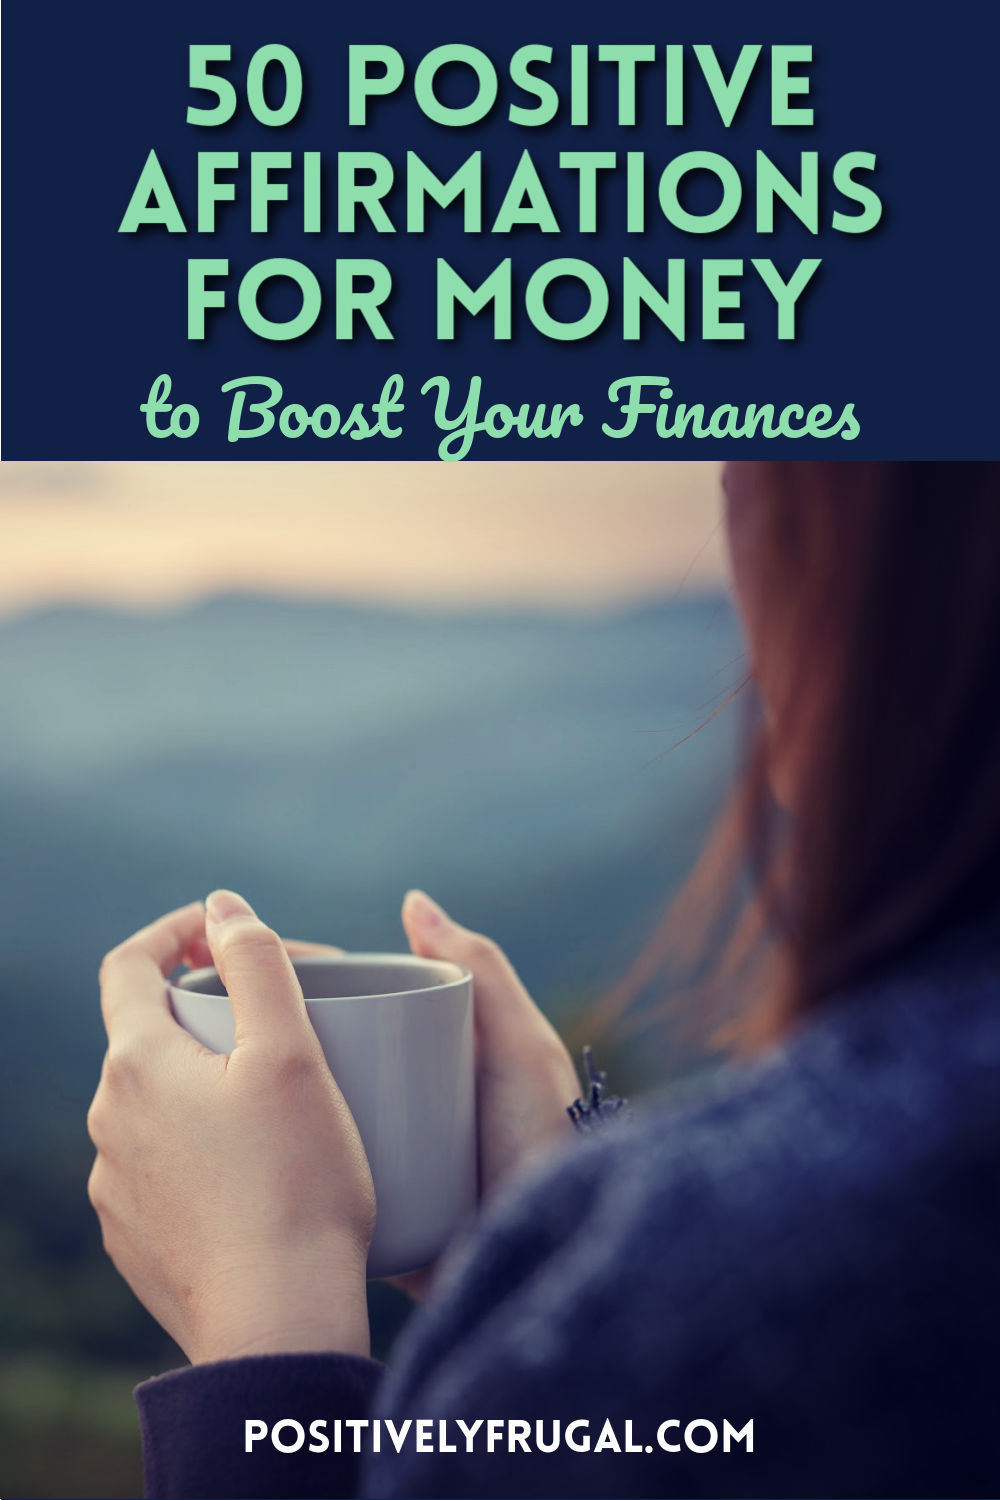 Positive Affirmations for Money to Boost Your Finances by PositivelyFrugal.com